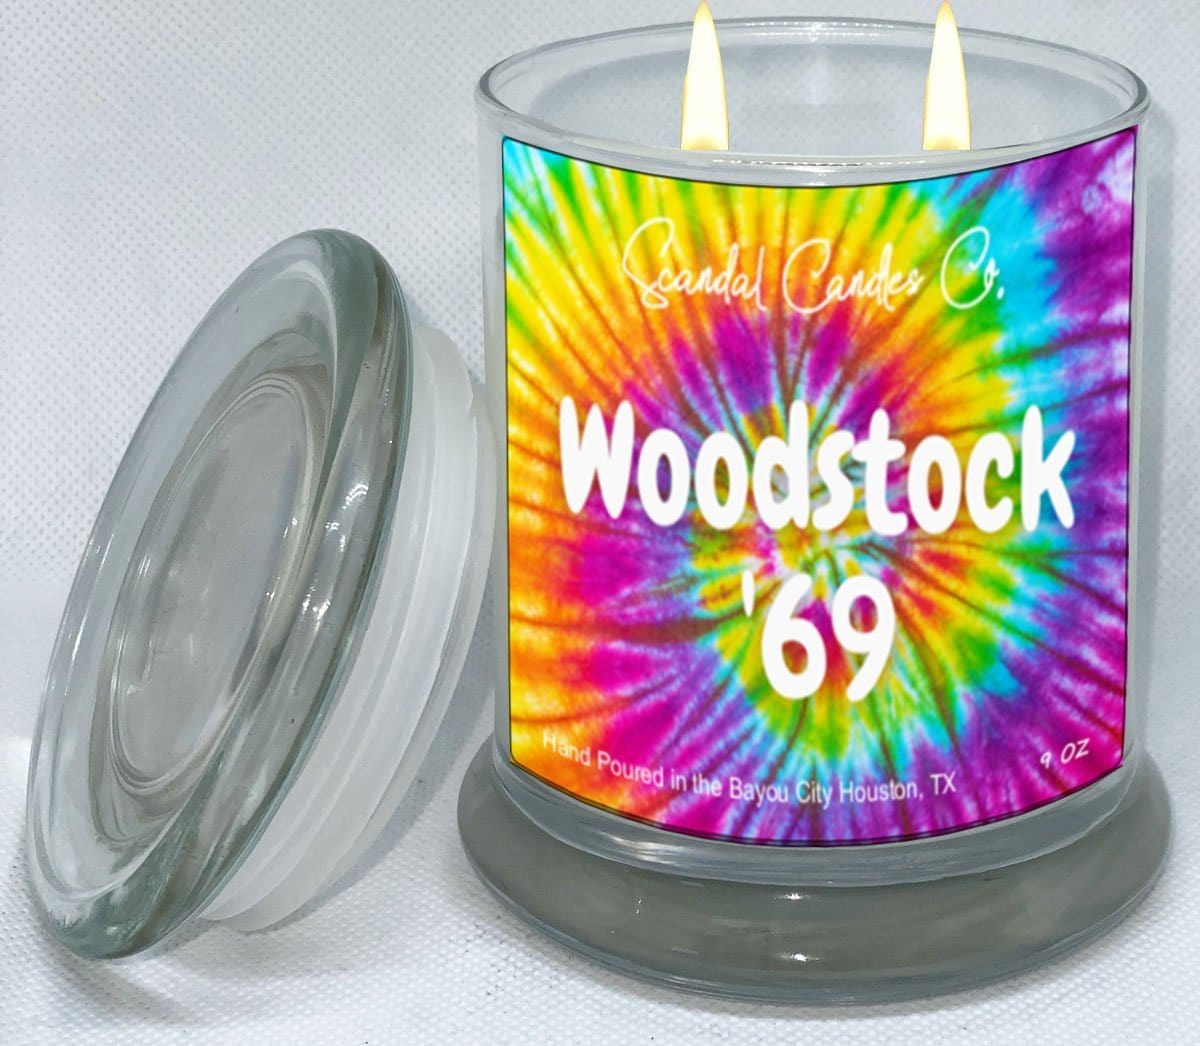 Woodstock '69 - Scandal Candles Co.